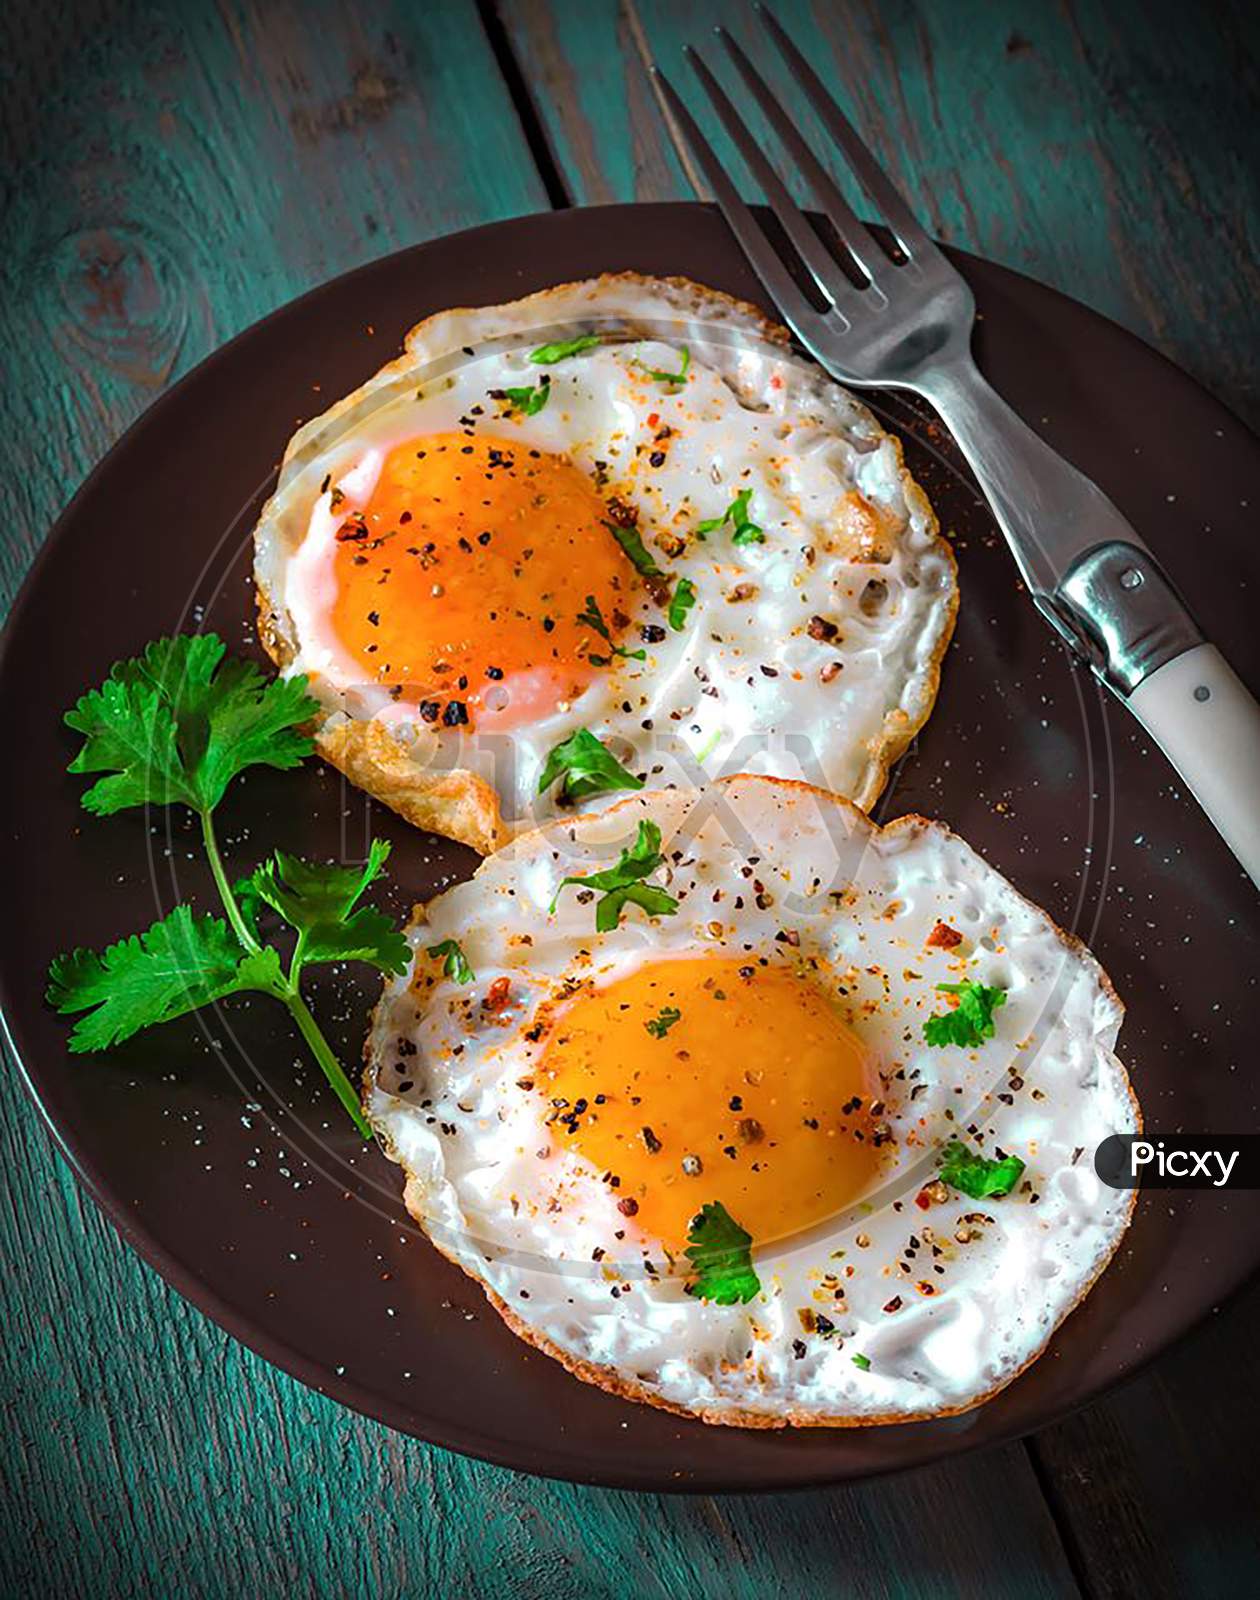 Poached Egg Garnish With Coriander Leaves And Spices